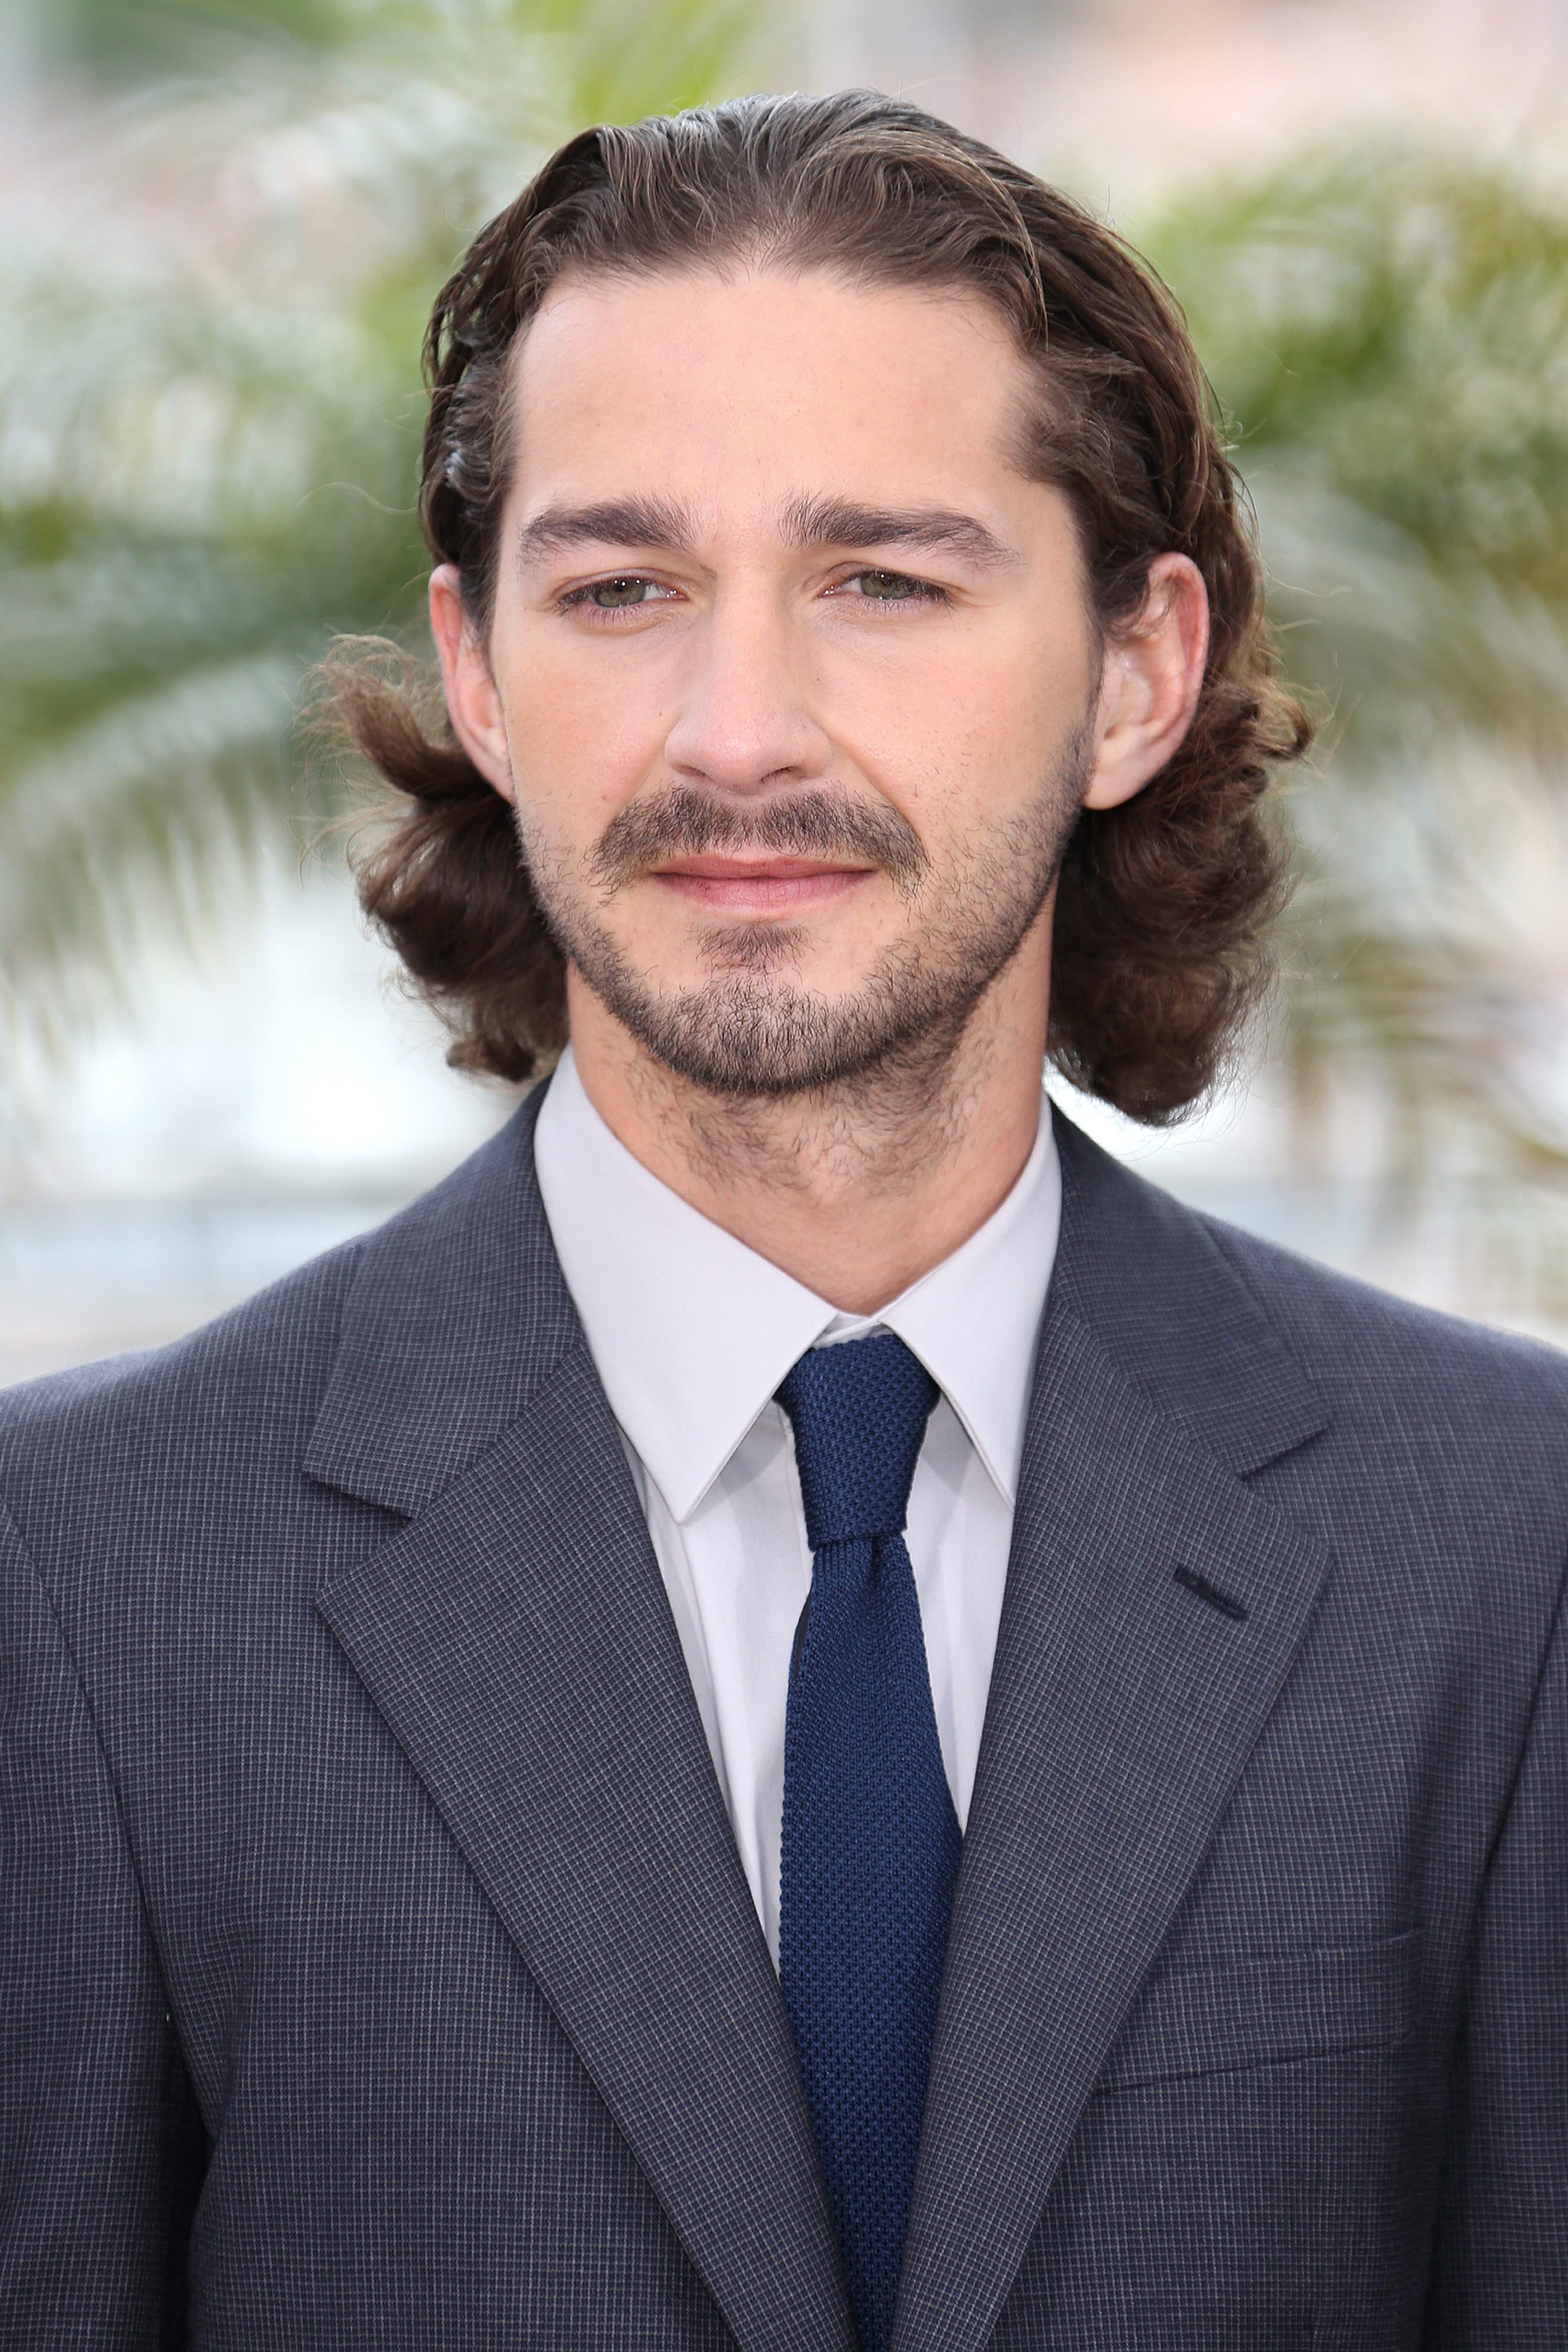 The image “http://static.thehollywoodgossip.com/images/gallery/shia-labeouf-image.jpg” cannot be displayed, because it contains errors.